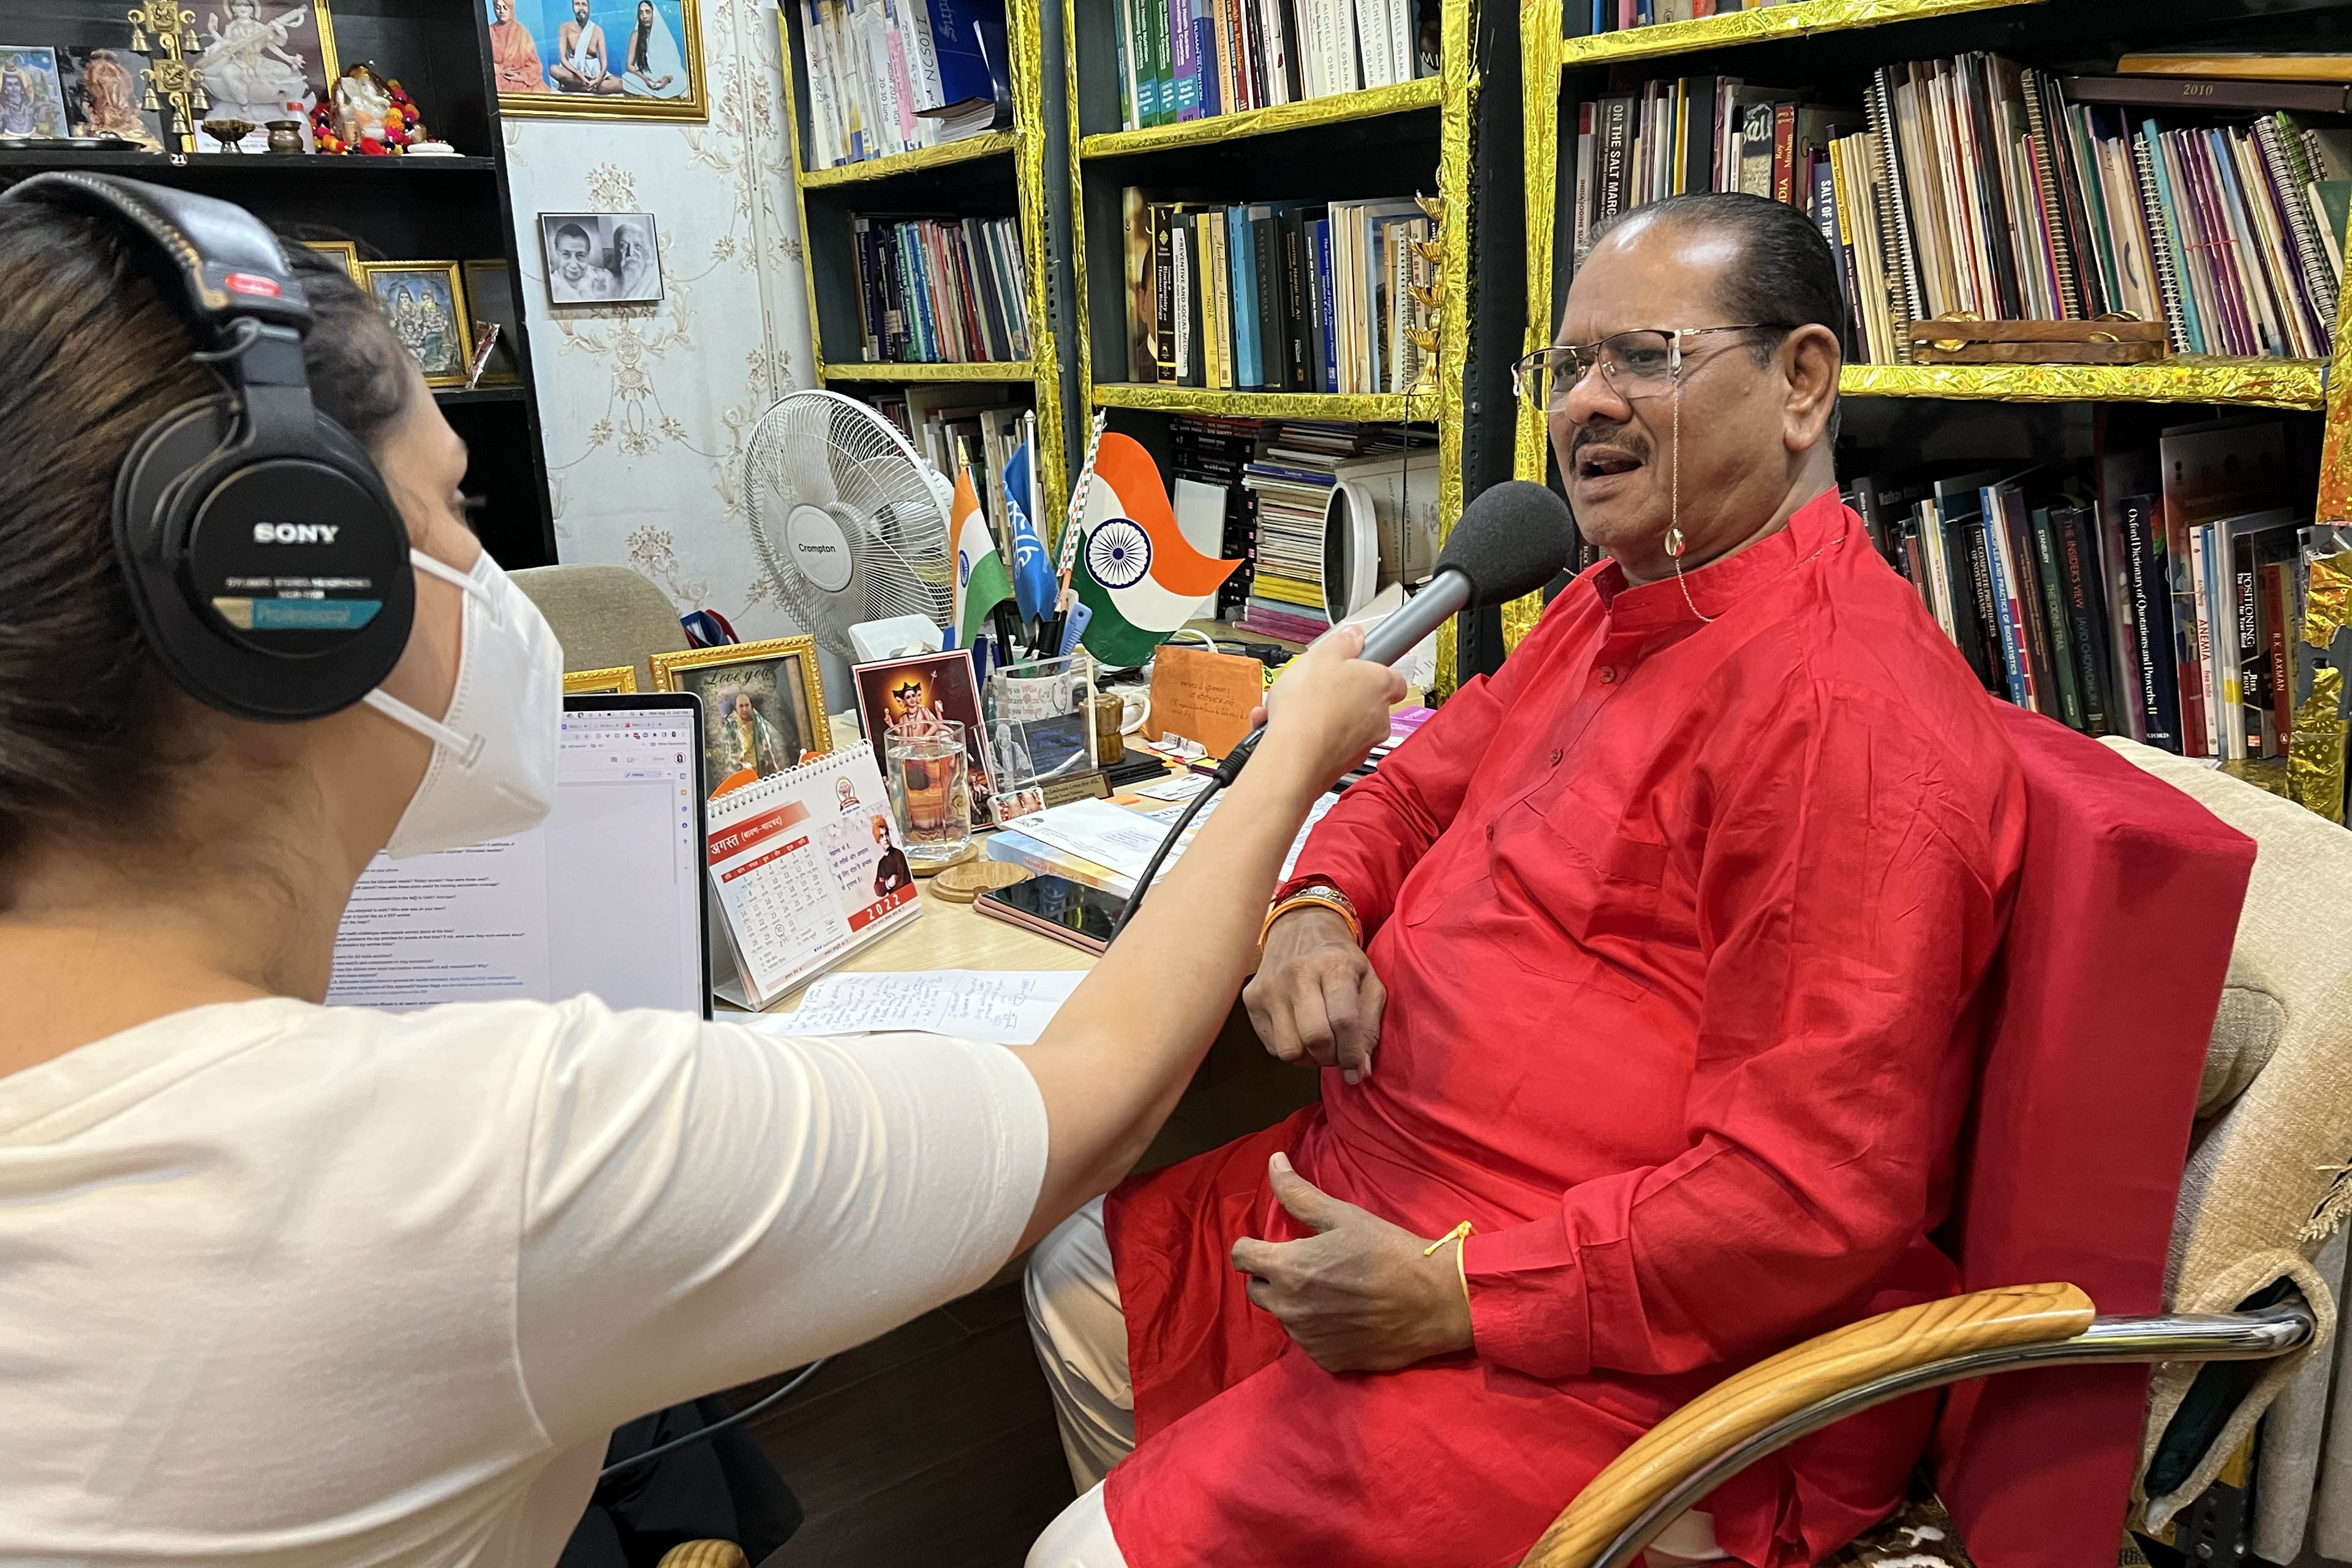 Chandrakant Pandav, wearing a bright red outfit and glasses, off of which hangs a small gold chain that links around the back of his neck, sits in his office as he is interviewed by Céline Gounder. She is to his left, holding a microphone to him as he speaks. She wears professional audio-recording headphones and a KN95 mask.